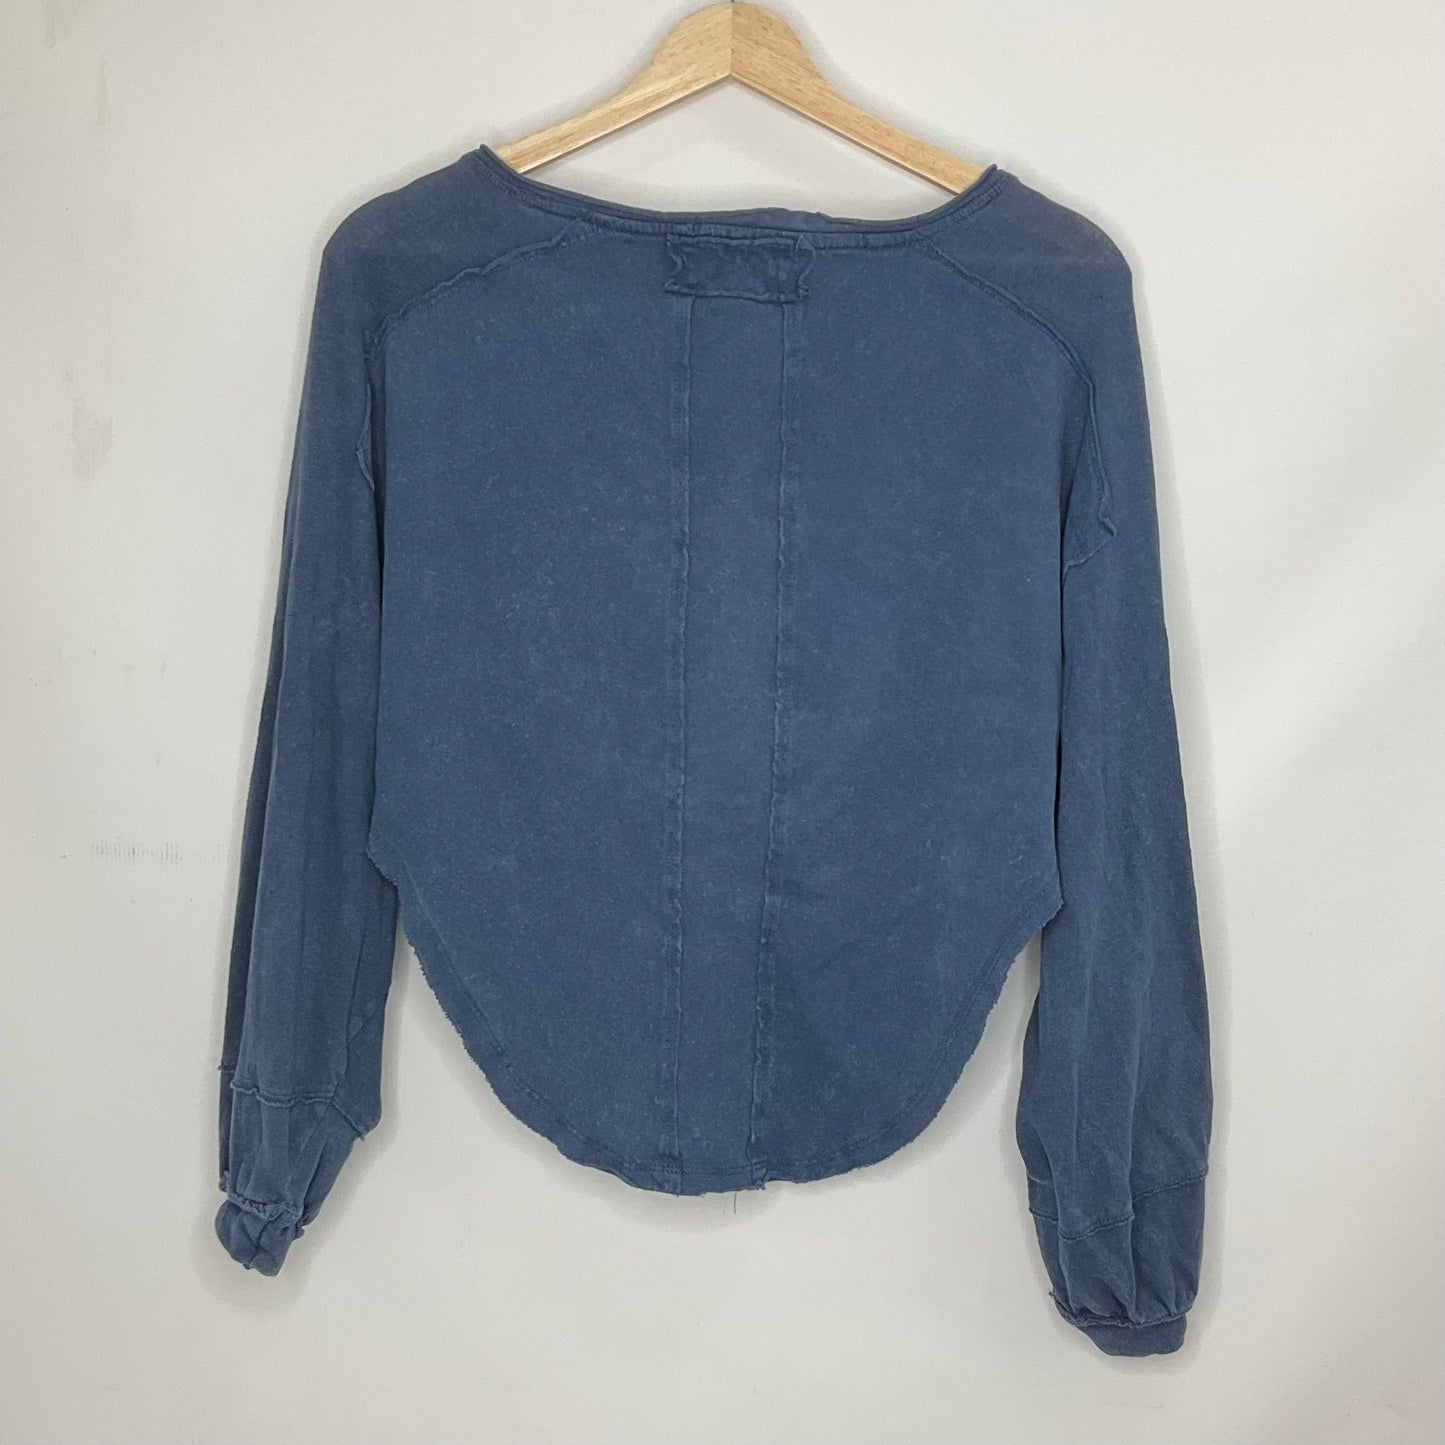 Blue Top Long Sleeve We The Free, Size S